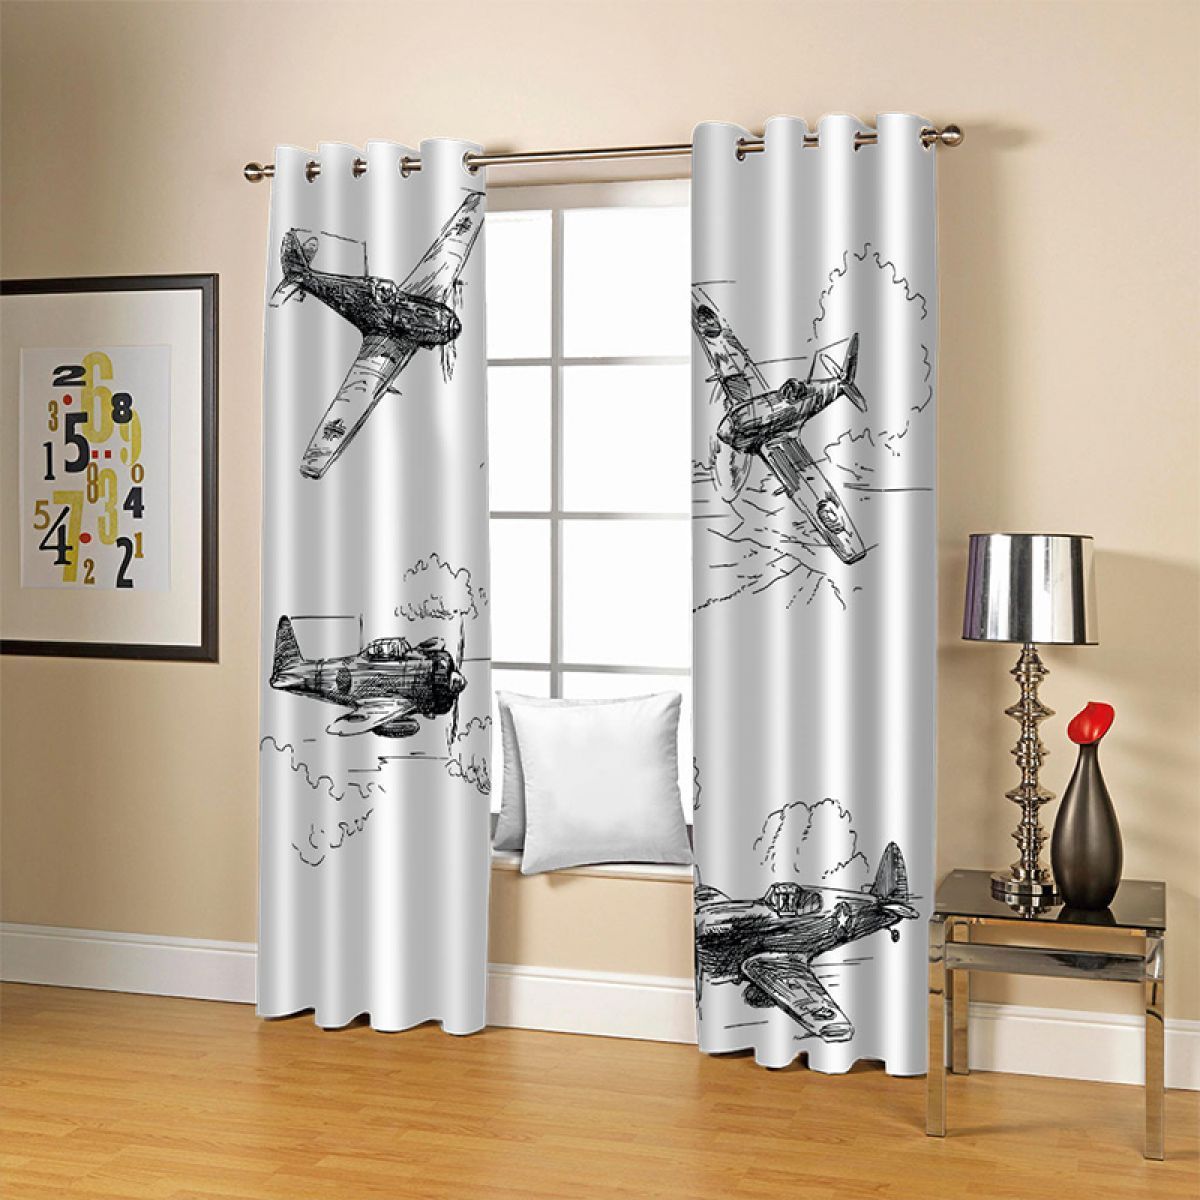 Flying Battle Planes Printed Window Curtain Home Decor